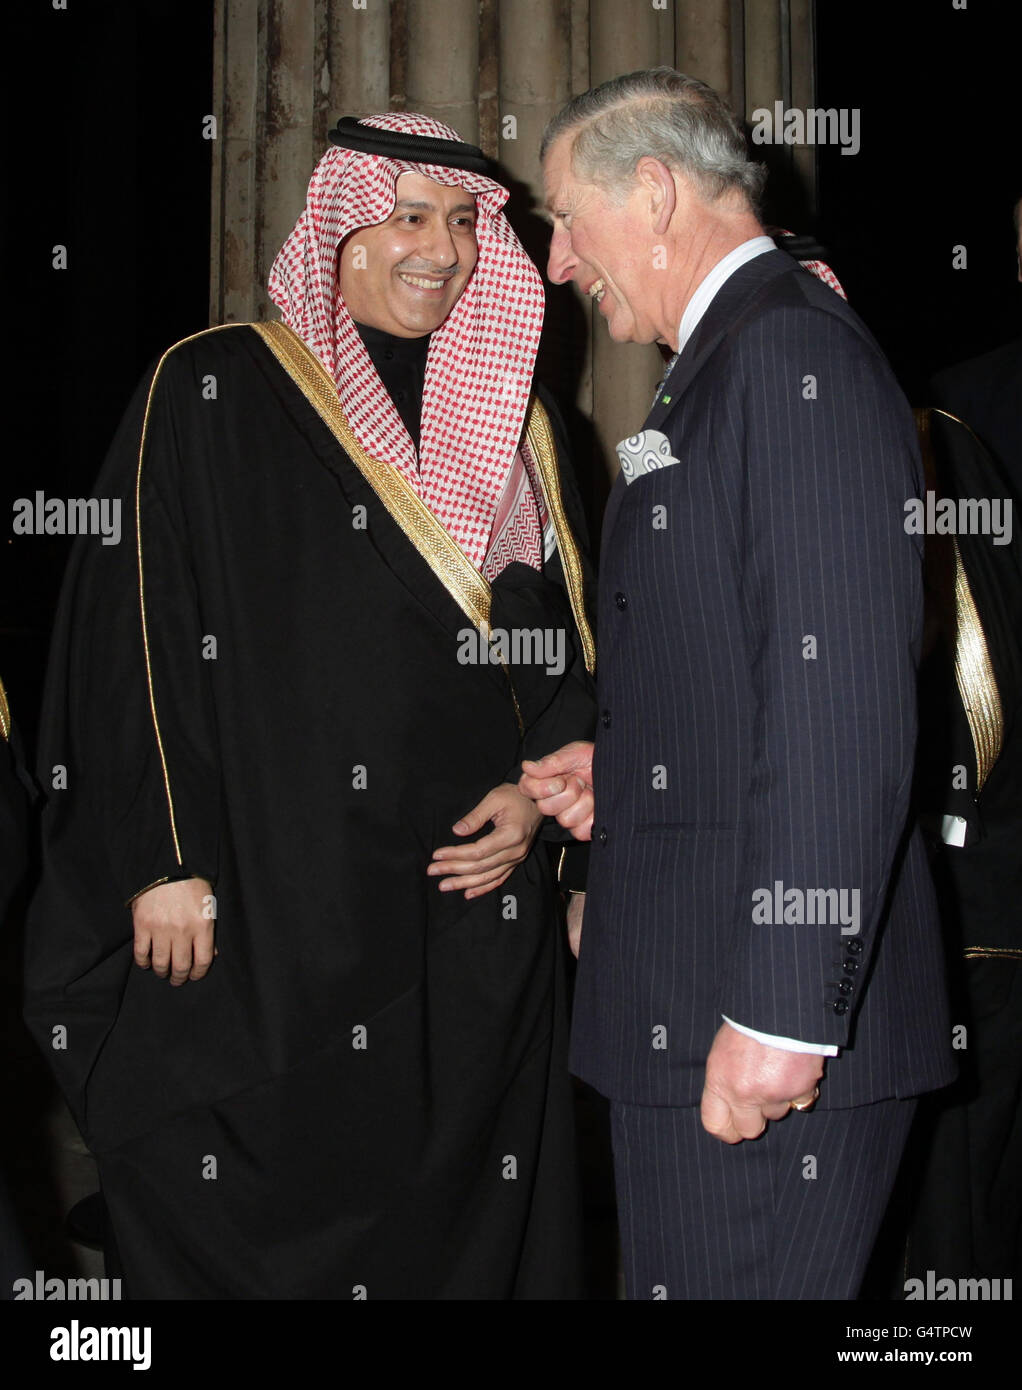 The Prince of Wales greeting HRH Prince Abdulaziz bin Abdullah (left) during a visit to Islamic art exhibition Hajj: Journey To The Heart Of Islam, at the British Museum in central London. Stock Photo